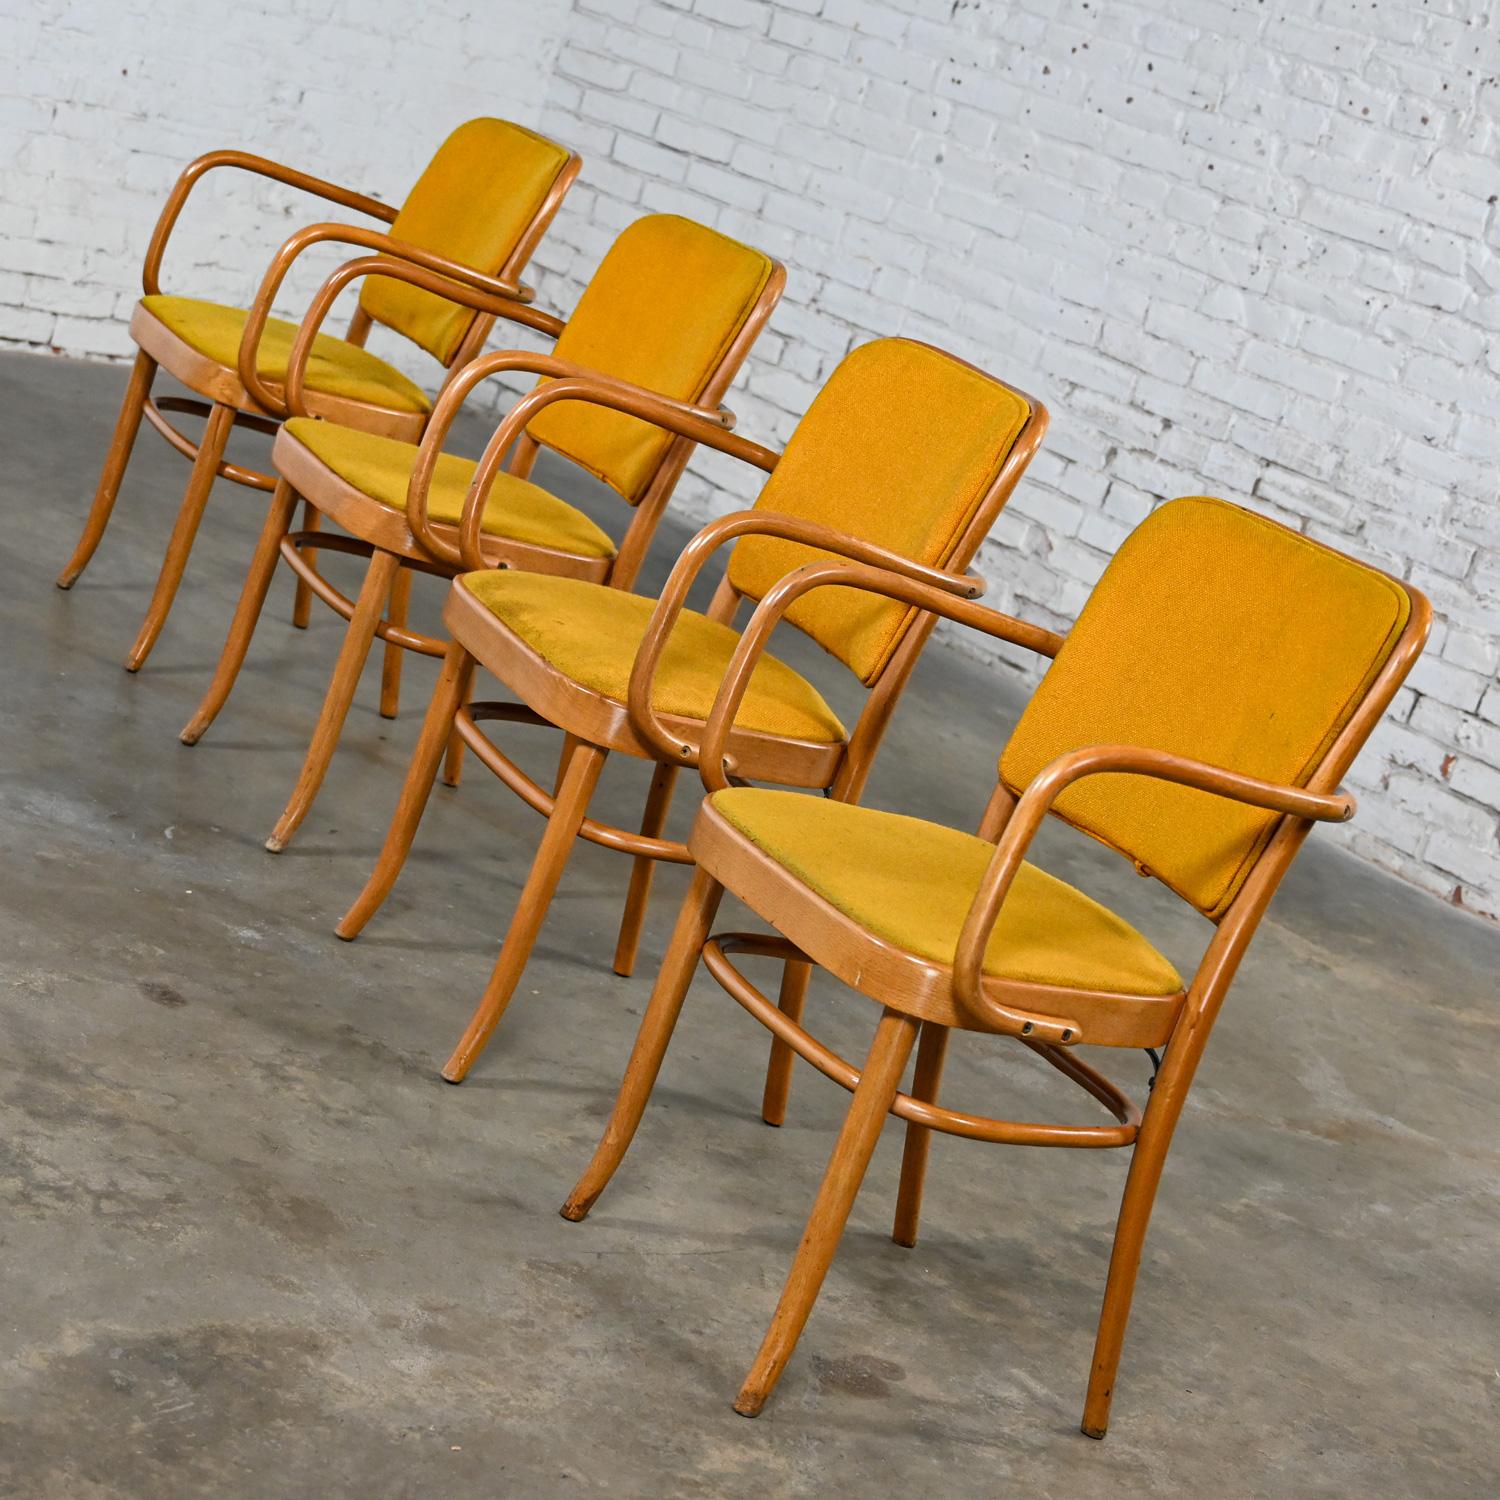 Wonderful vintage Bauhaus beech bentwood frame Thonet Josef Hoffman Prague 811 style armed dining chairs by Falcon Products Inc., Set of 4. Beautiful condition, keeping in mind that these are vintage and not new so will have signs of use and wear